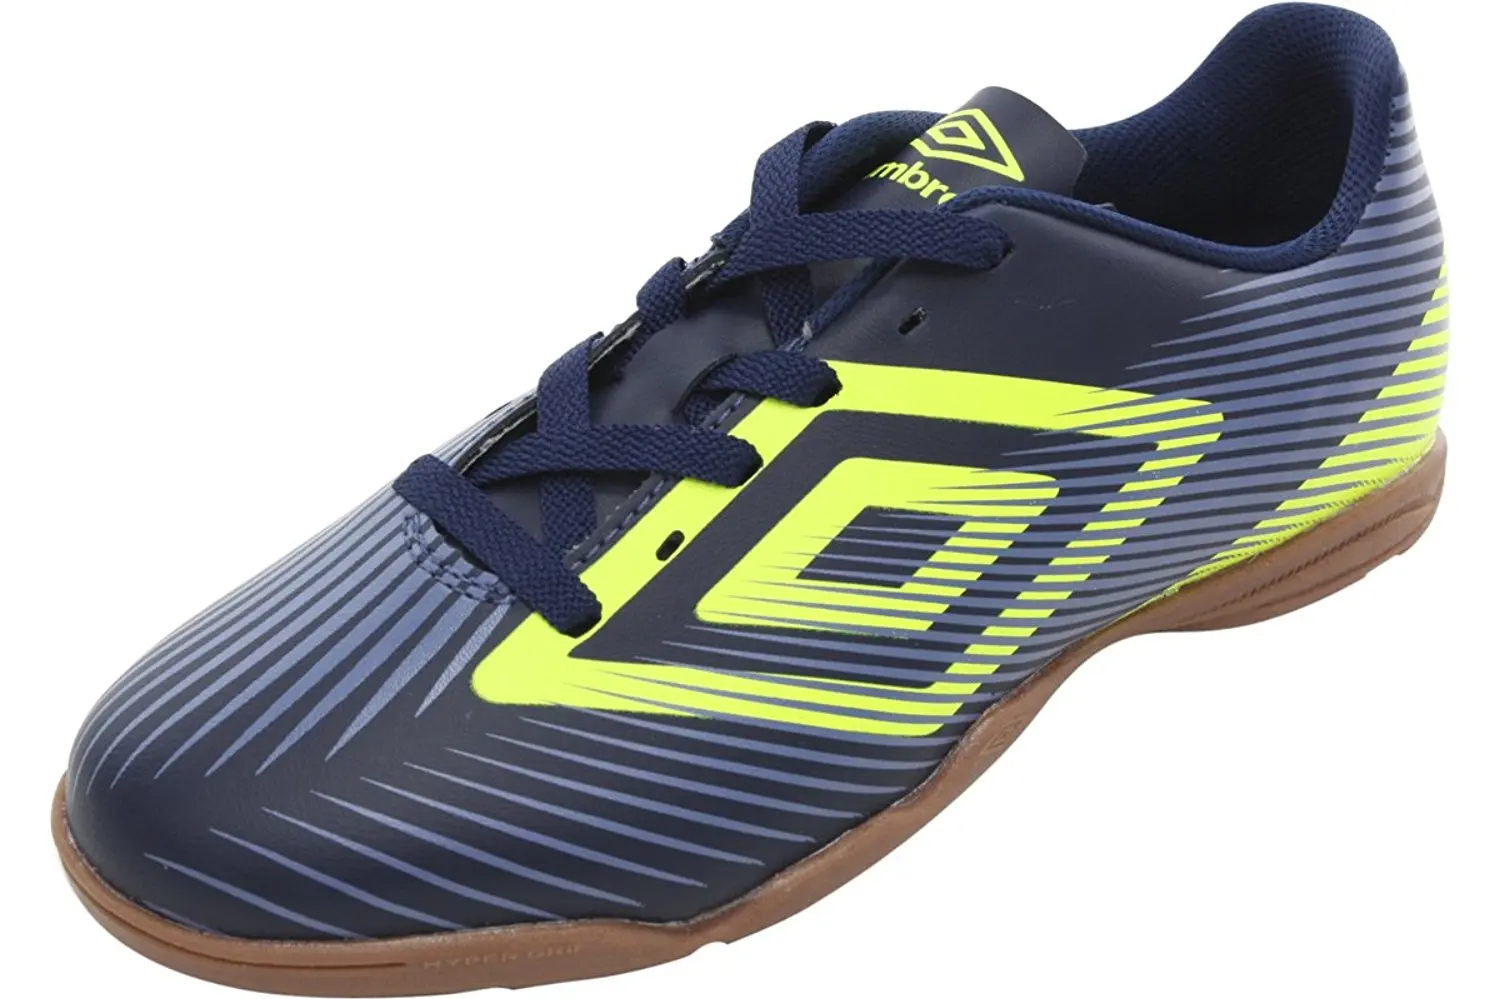 Cheap Umbro Indoor Soccer Shoes, find 